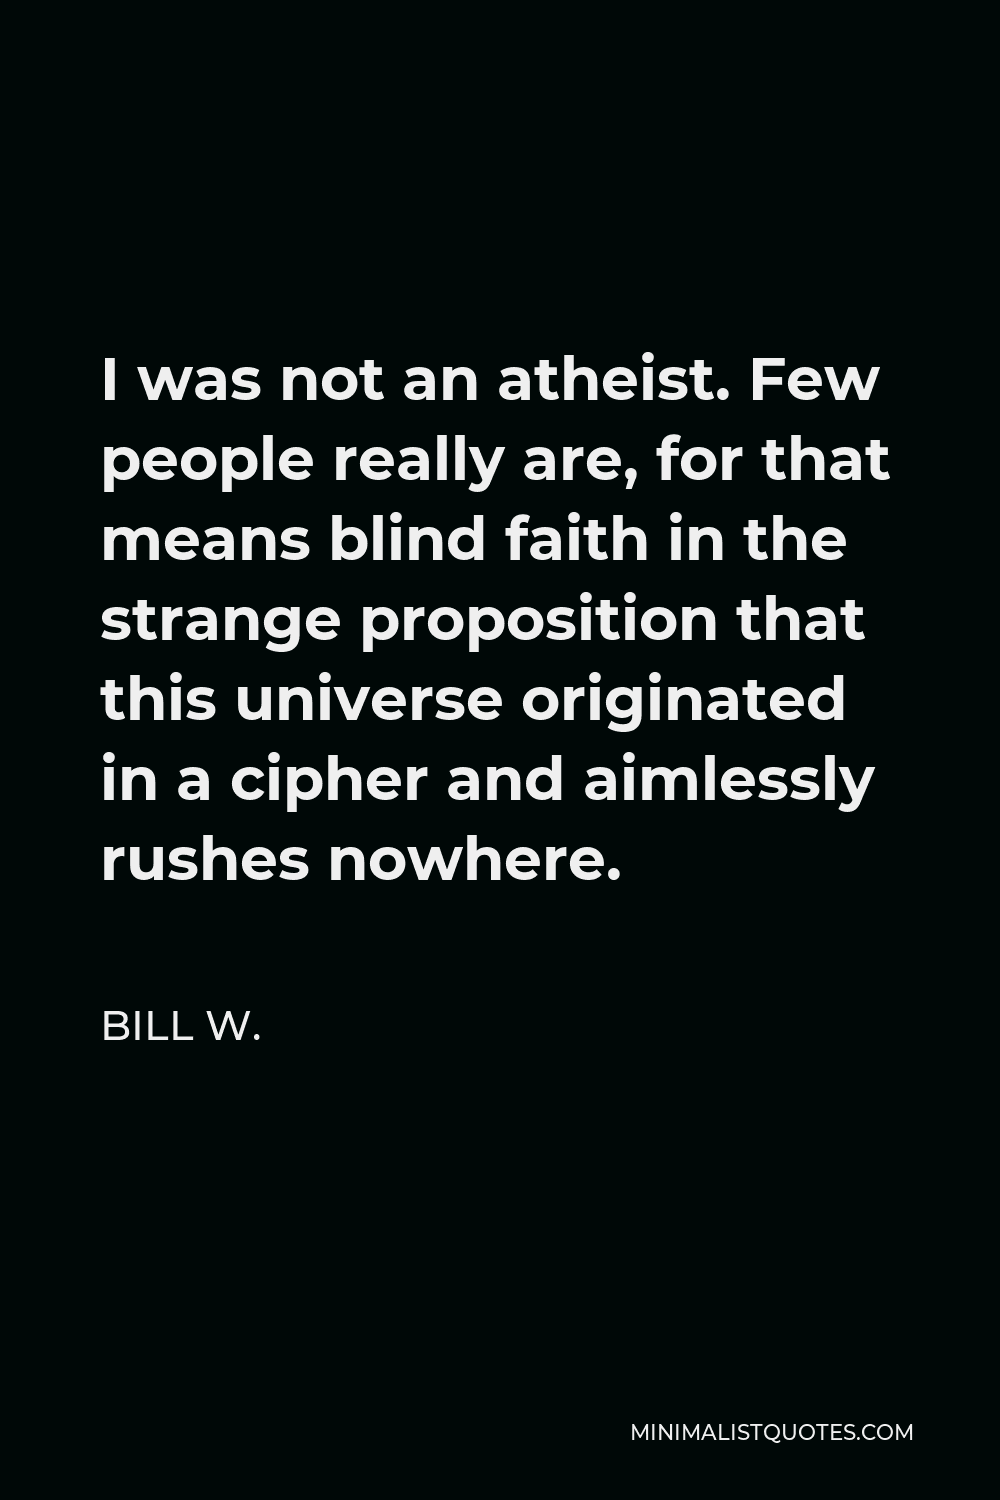 Bill W. Quote - I was not an atheist. Few people really are, for that means blind faith in the strange proposition that this universe originated in a cipher and aimlessly rushes nowhere.